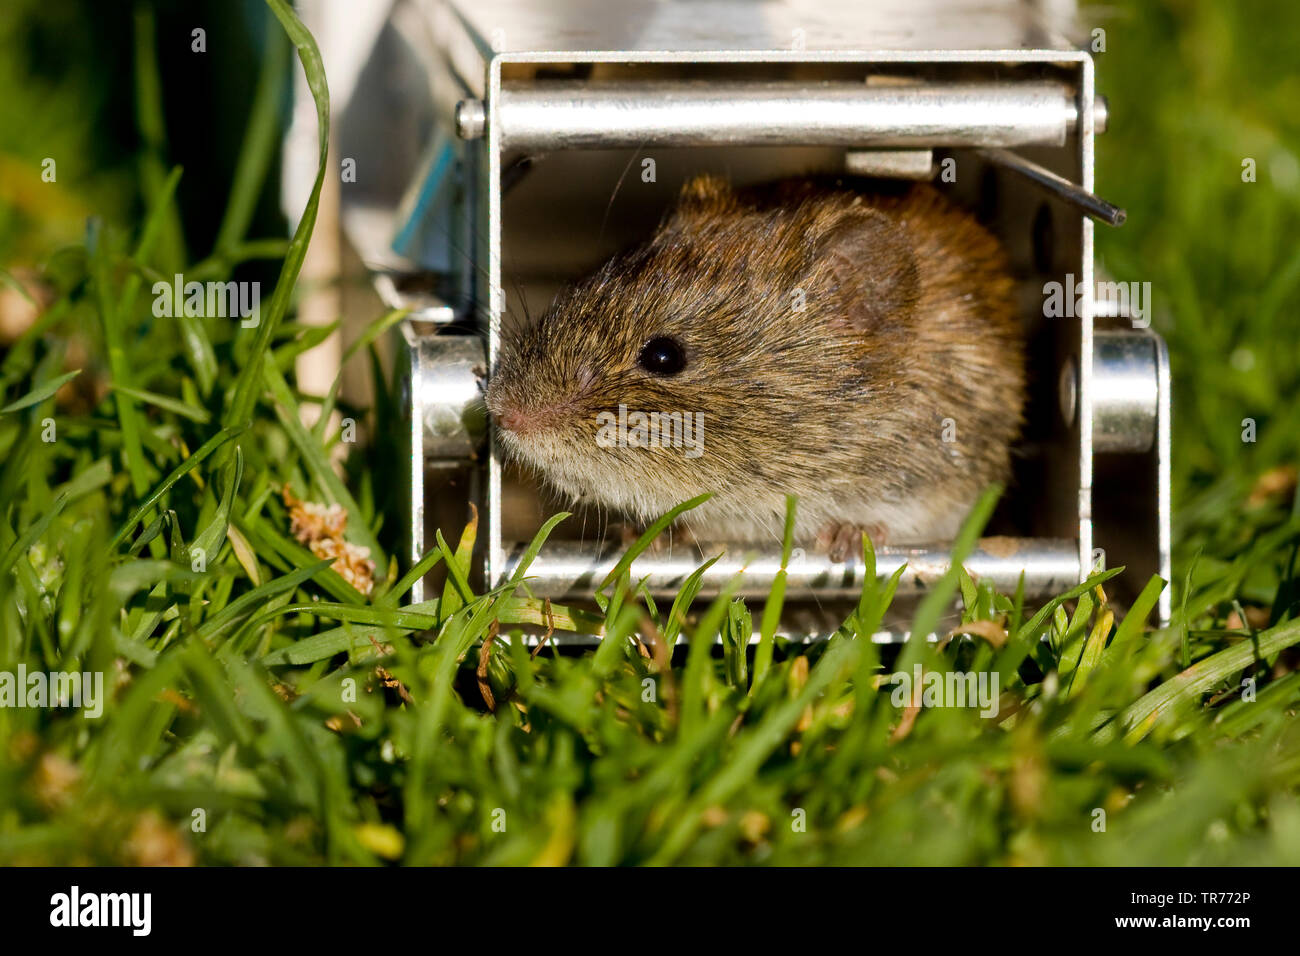 https://c8.alamy.com/comp/TR772P/common-vole-microtus-arvalis-in-a-trap-netherlands-TR772P.jpg